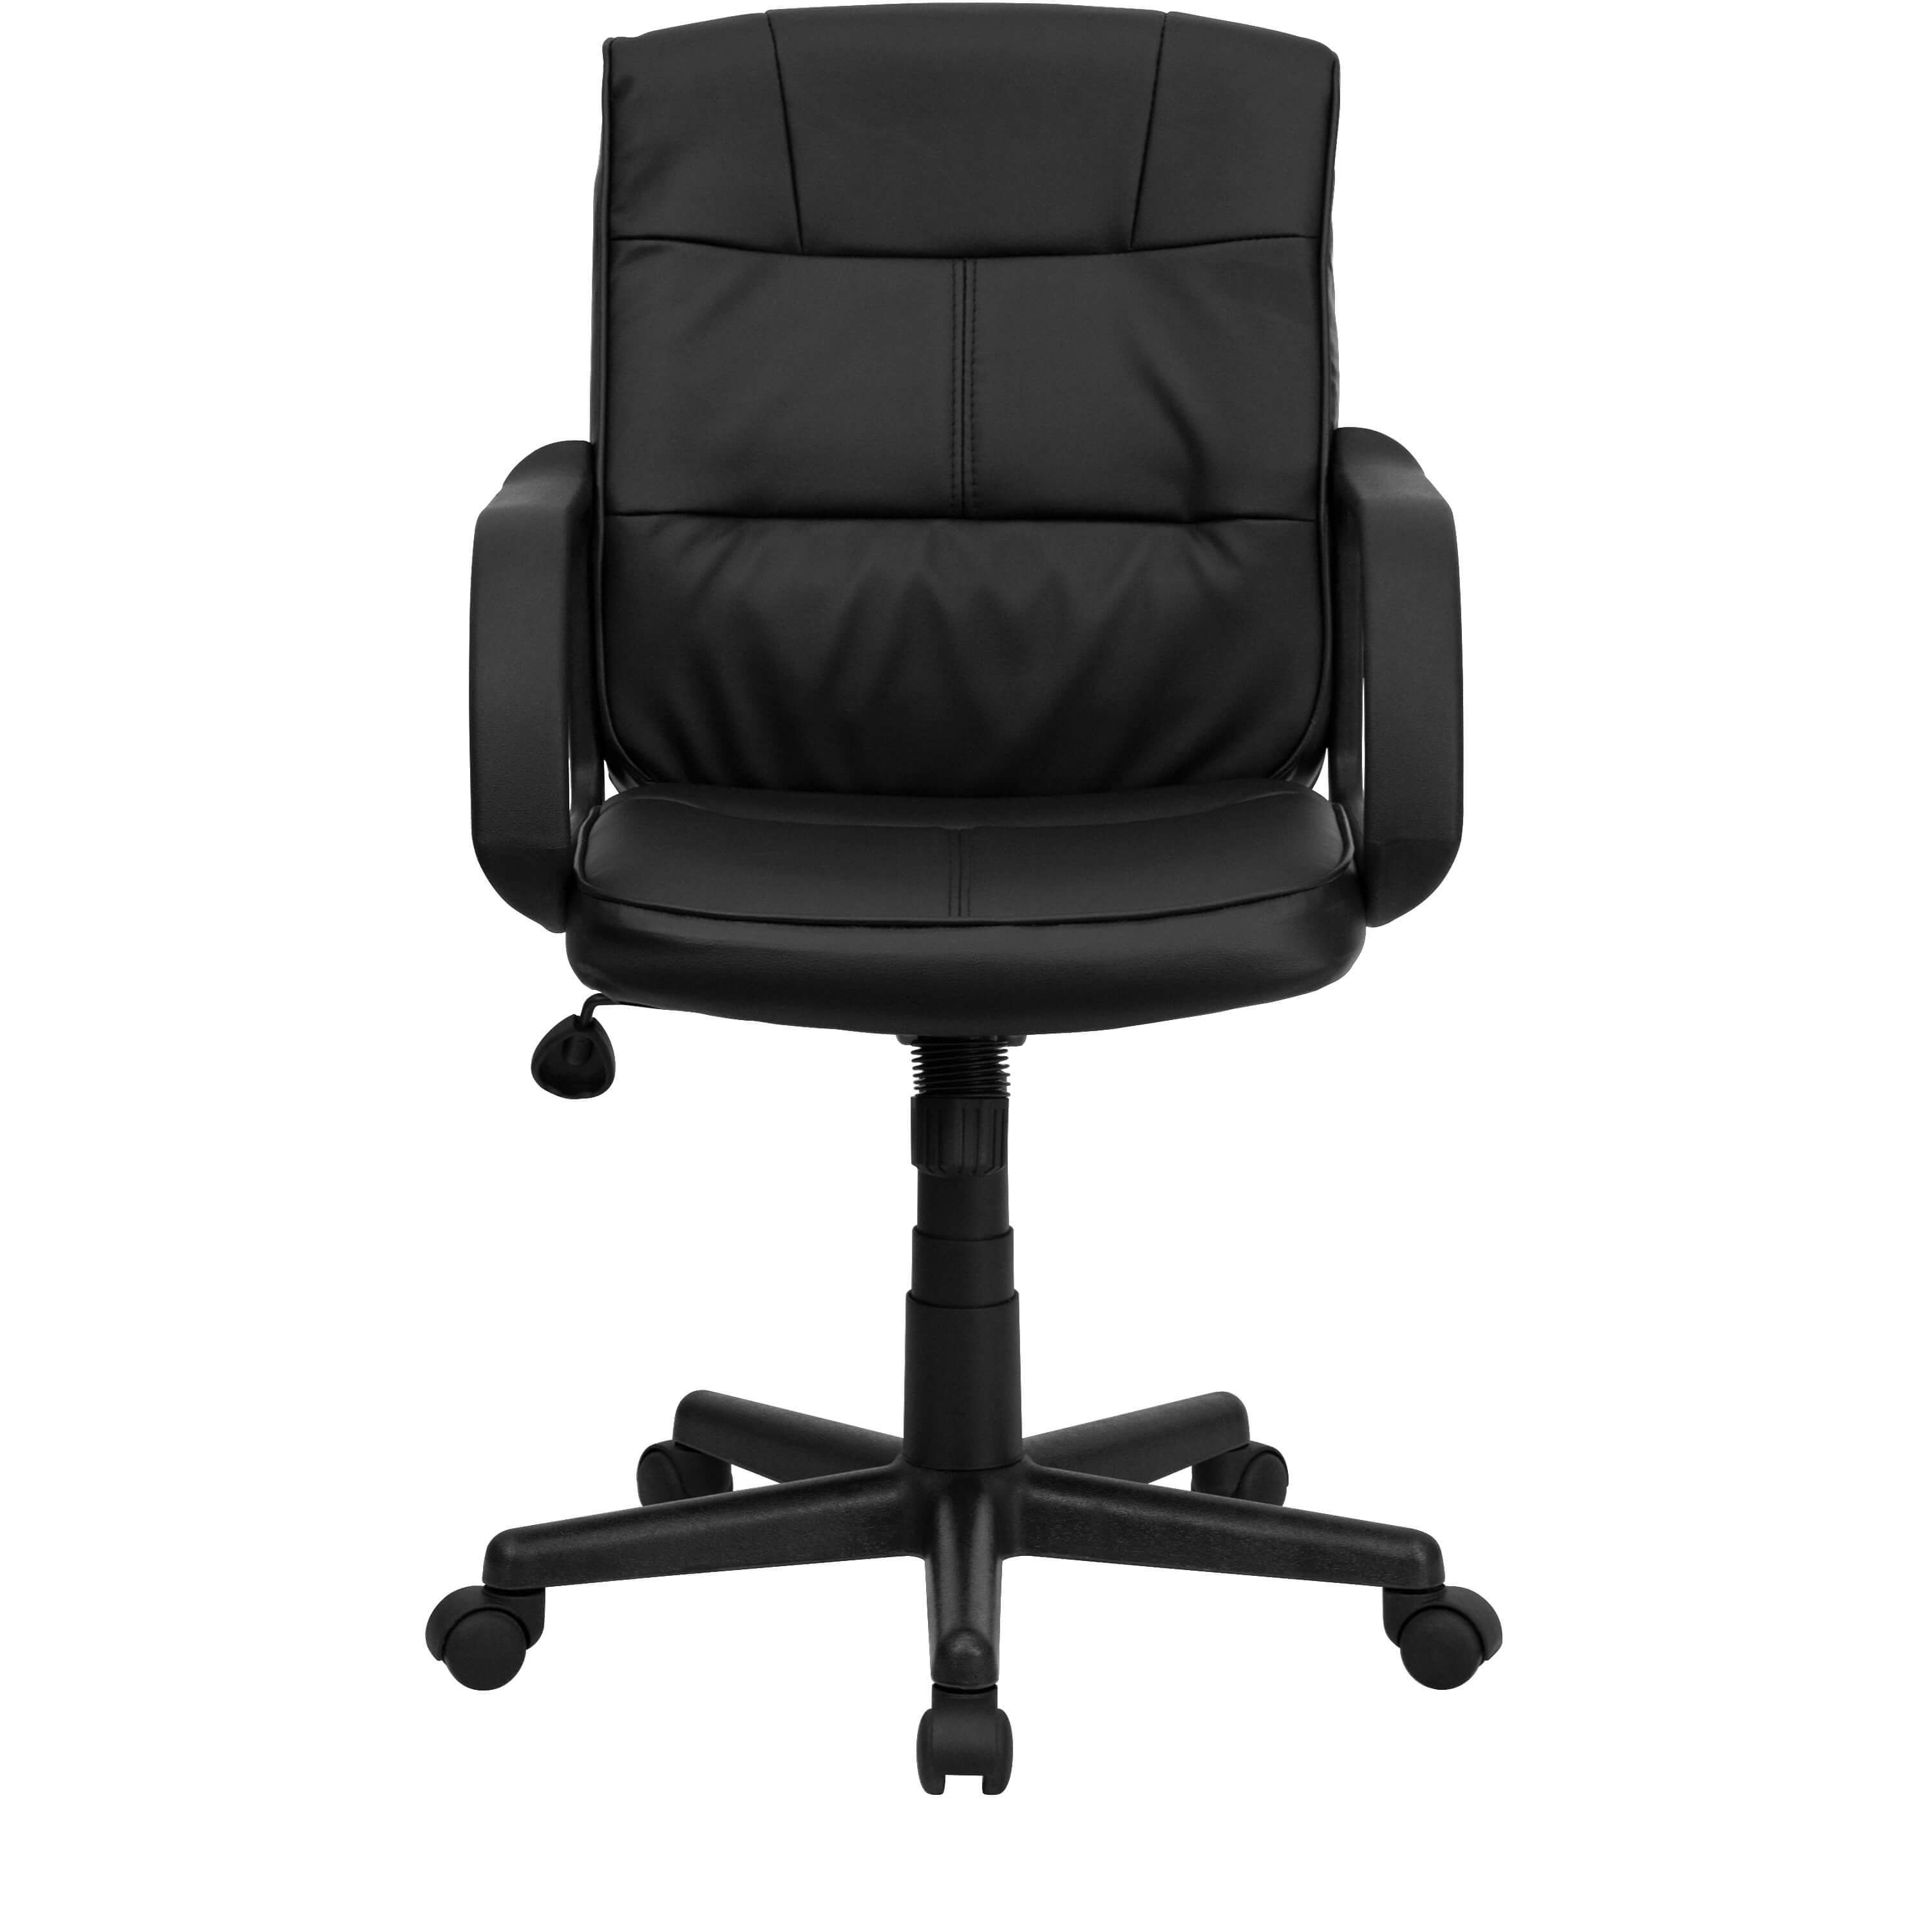 Black leather office chair front view